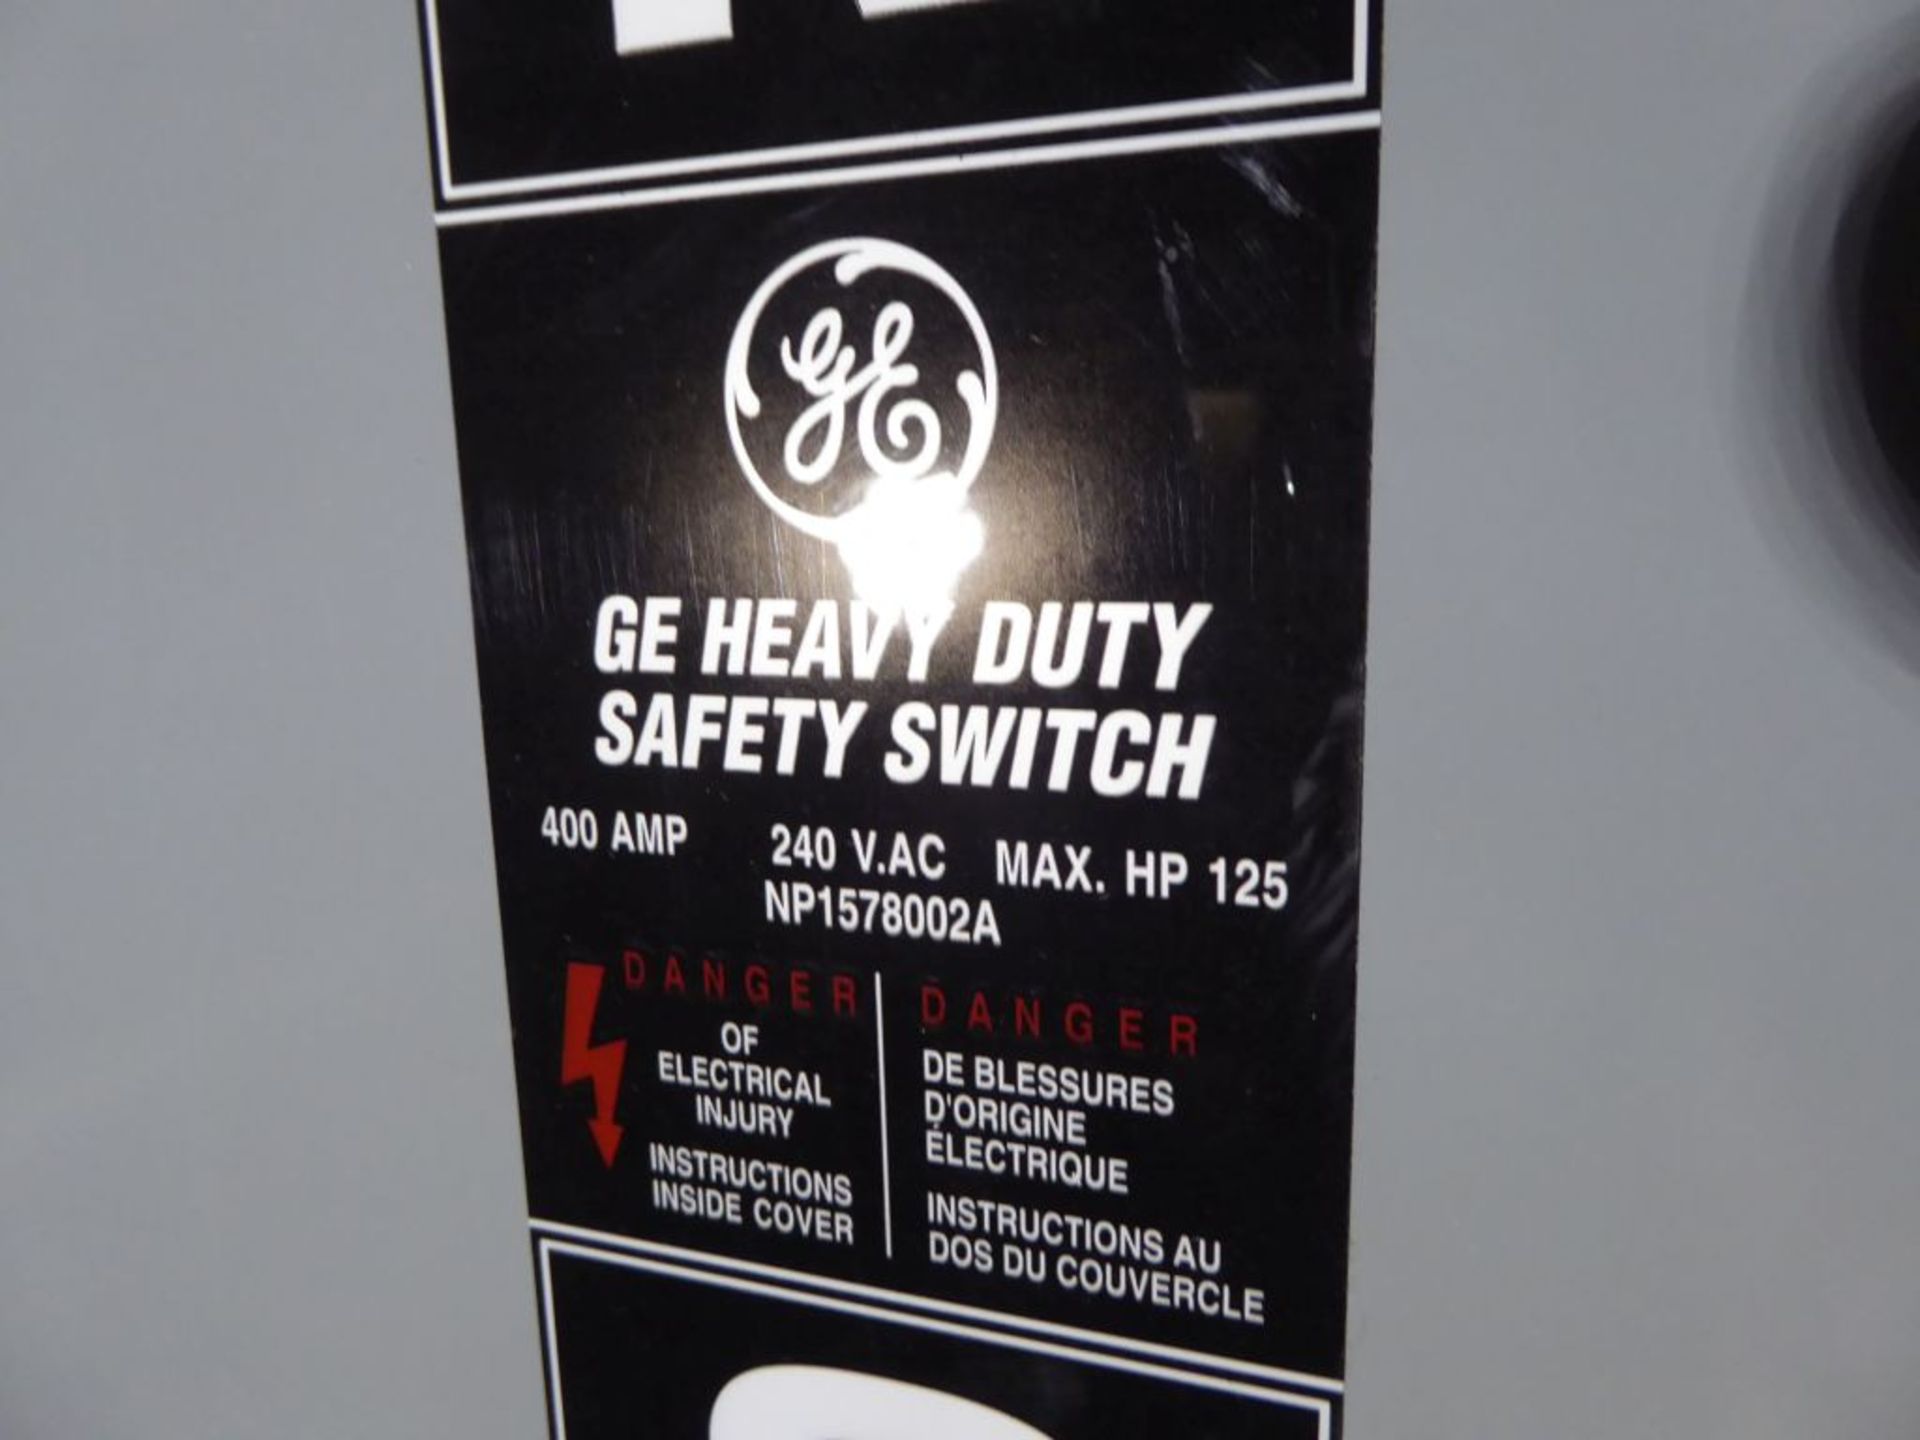 Spartanburg, SC - GE Heavy Duty Safety Switch - Image 2 of 2